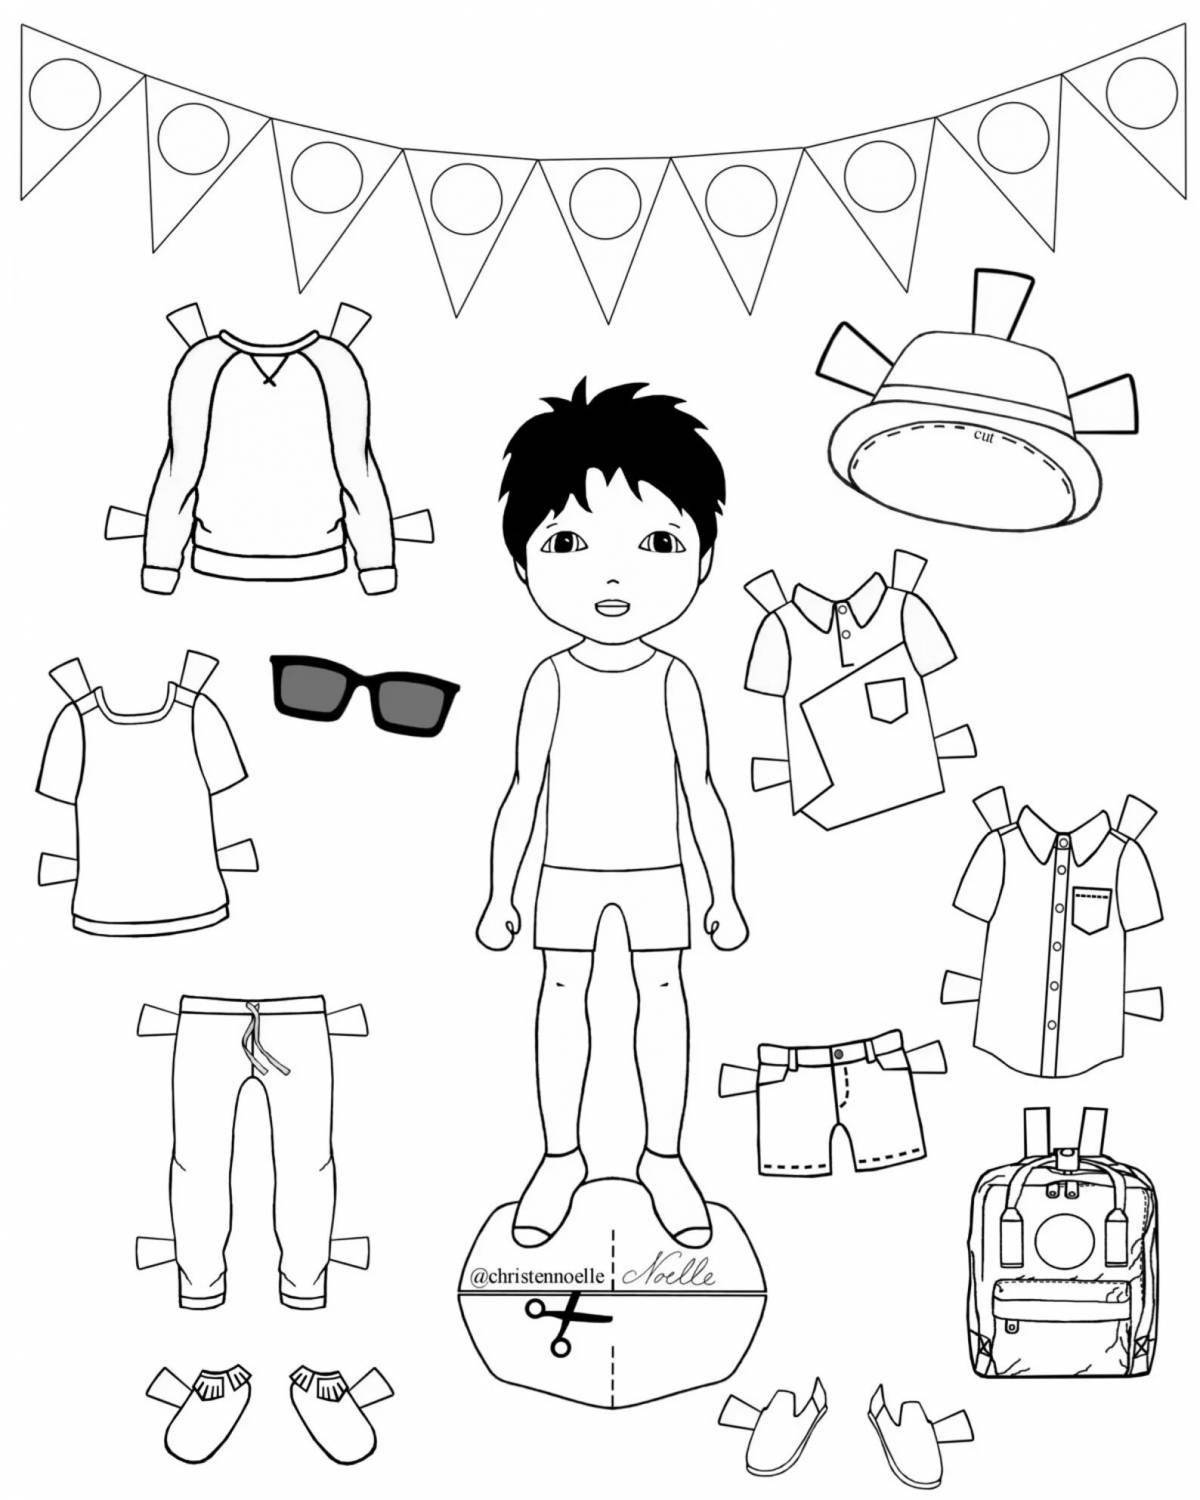 Colour-obsessed paper doll boys